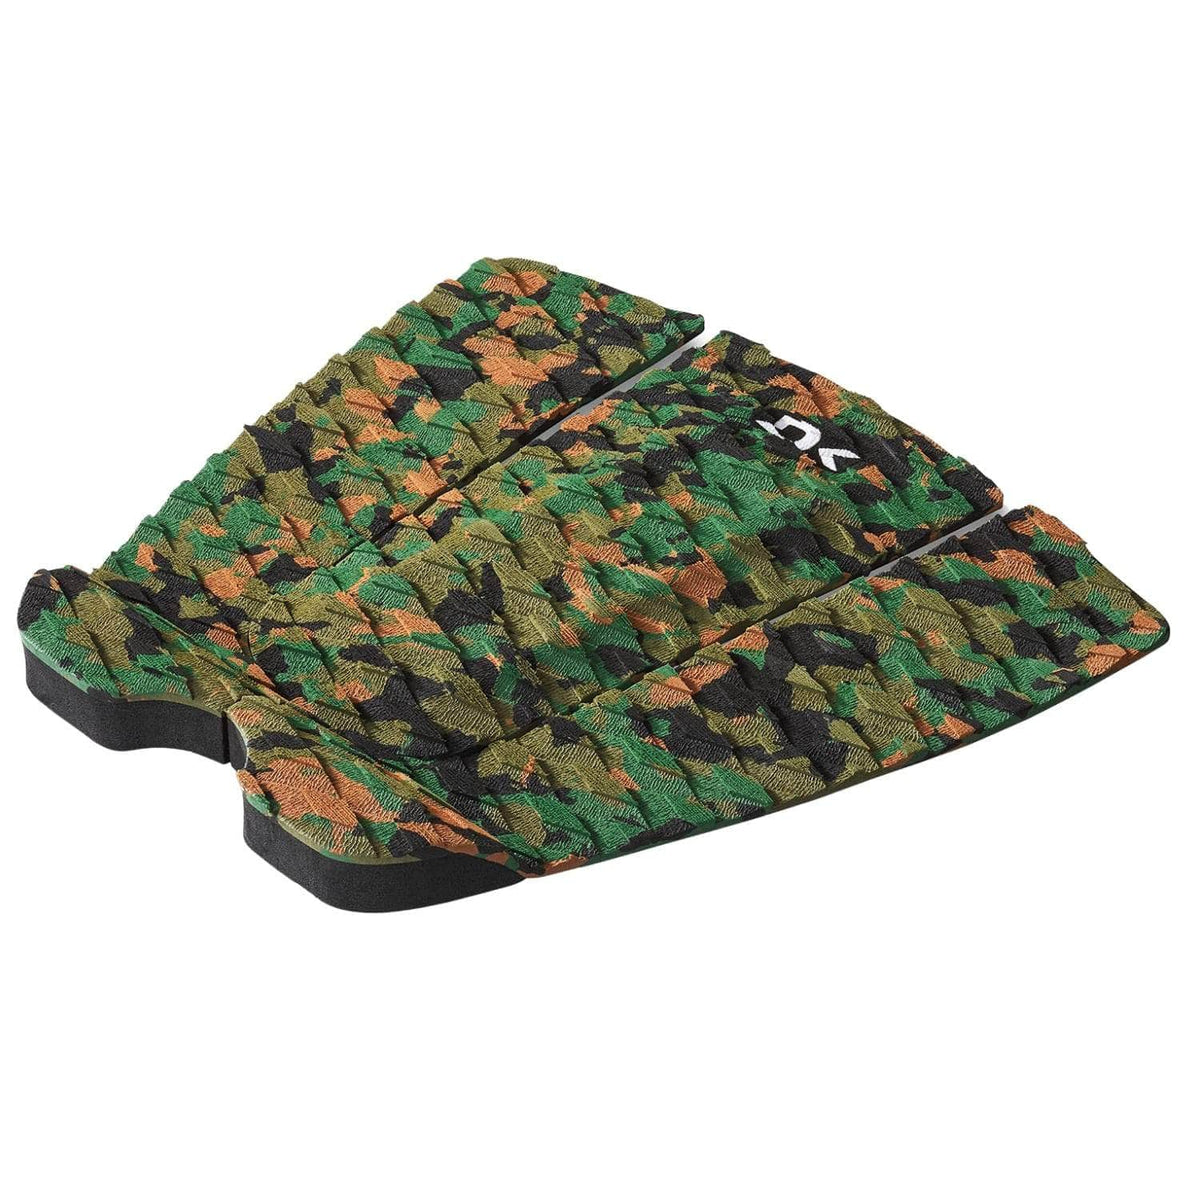 Dakine Andy Irons Pro Traction Surfboard Tail Pad - Olive Camo